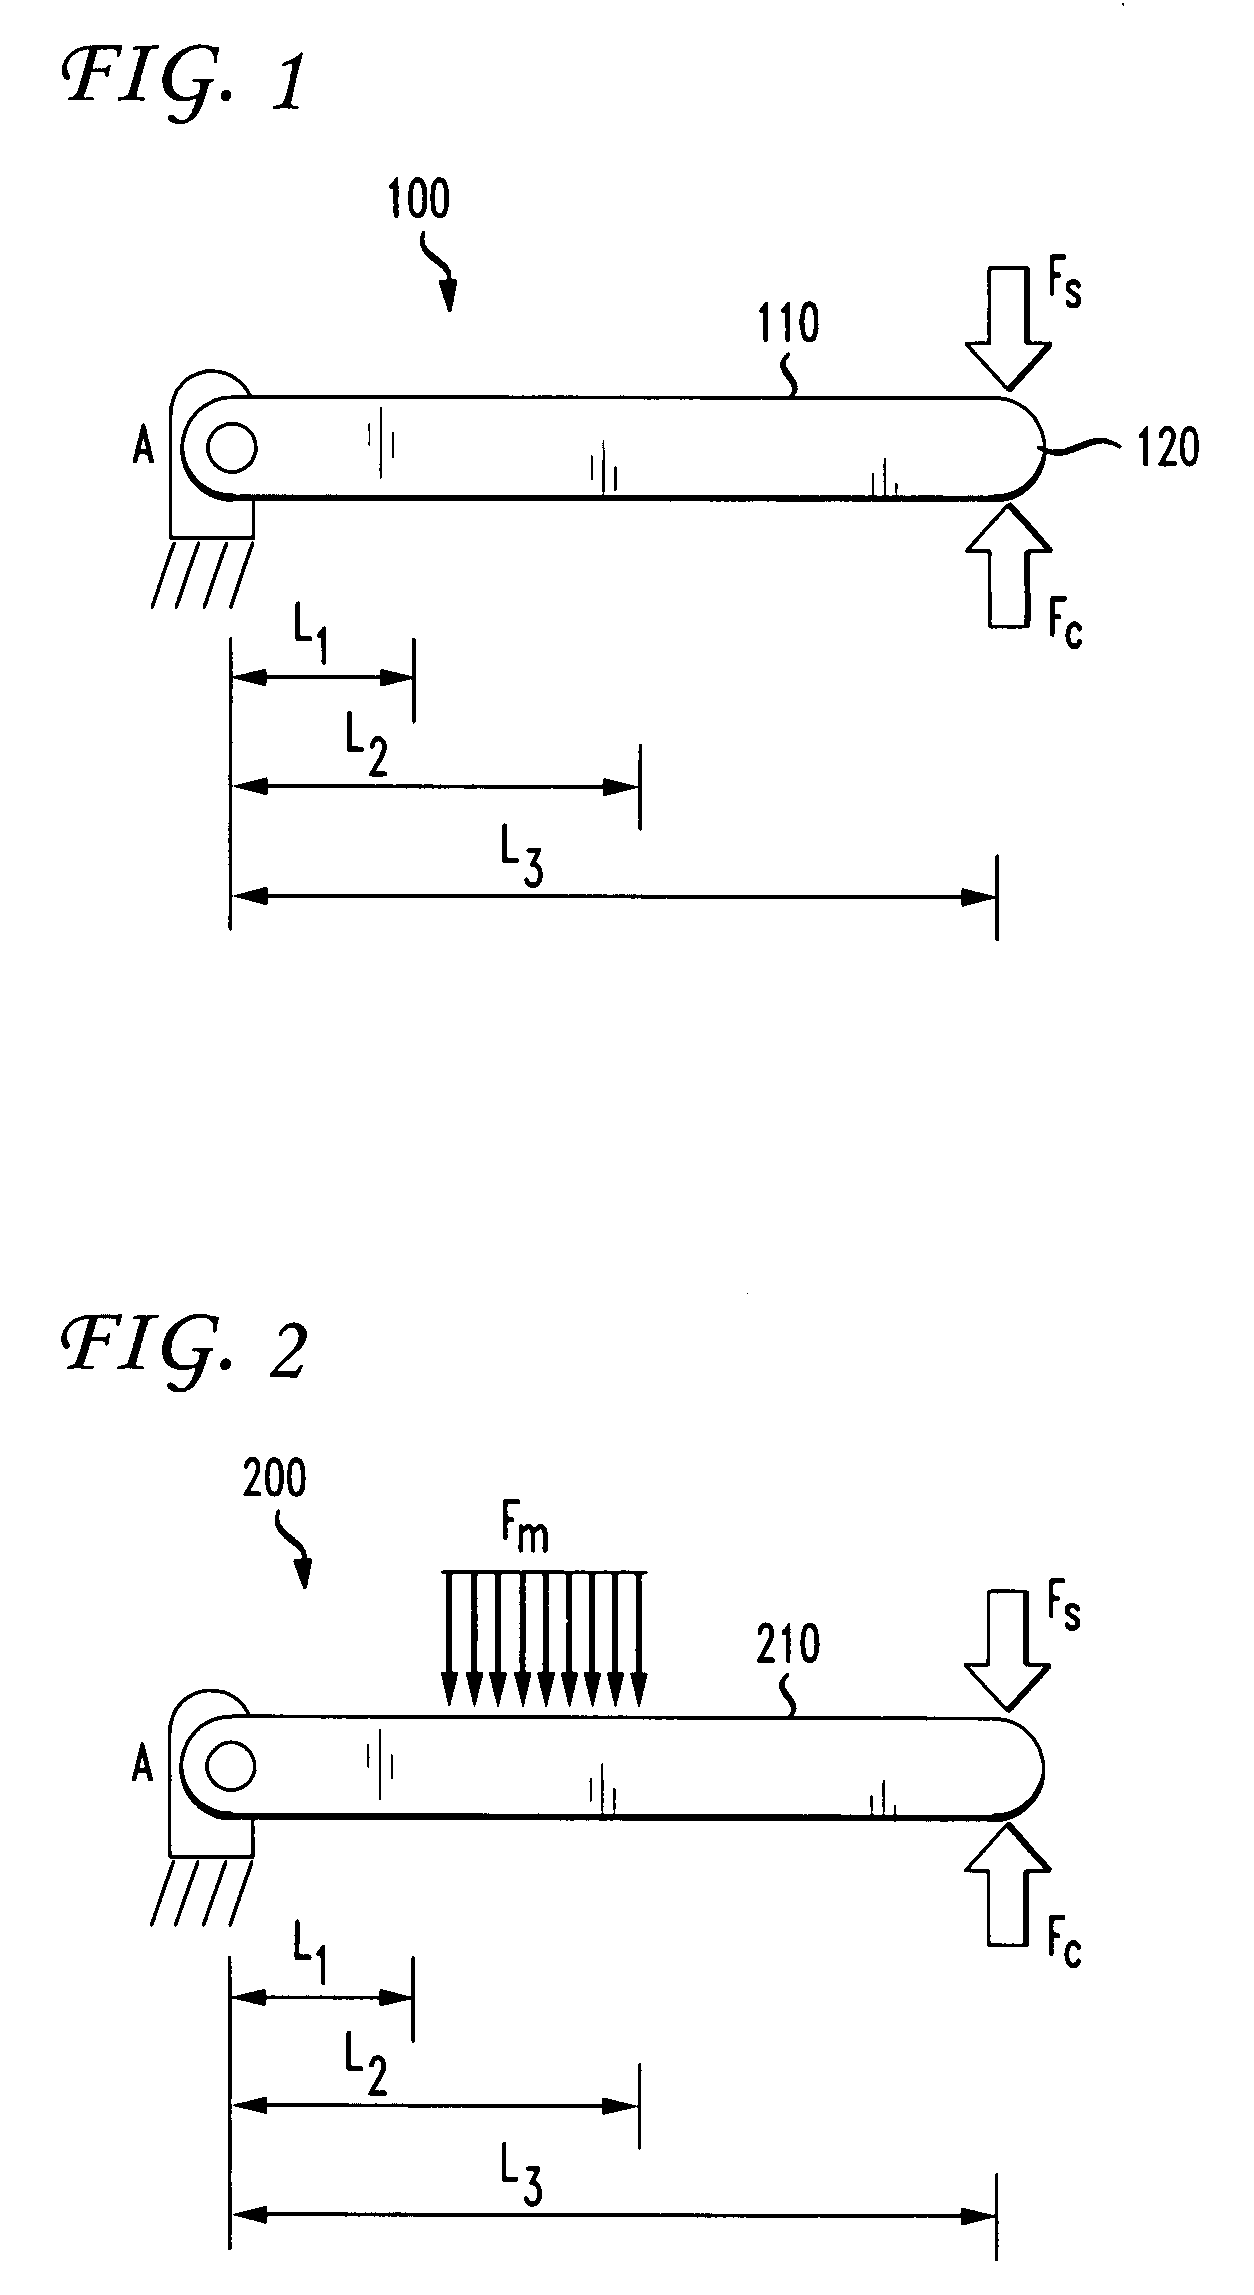 Design and method for keeping electrical contacts closed during short circuits